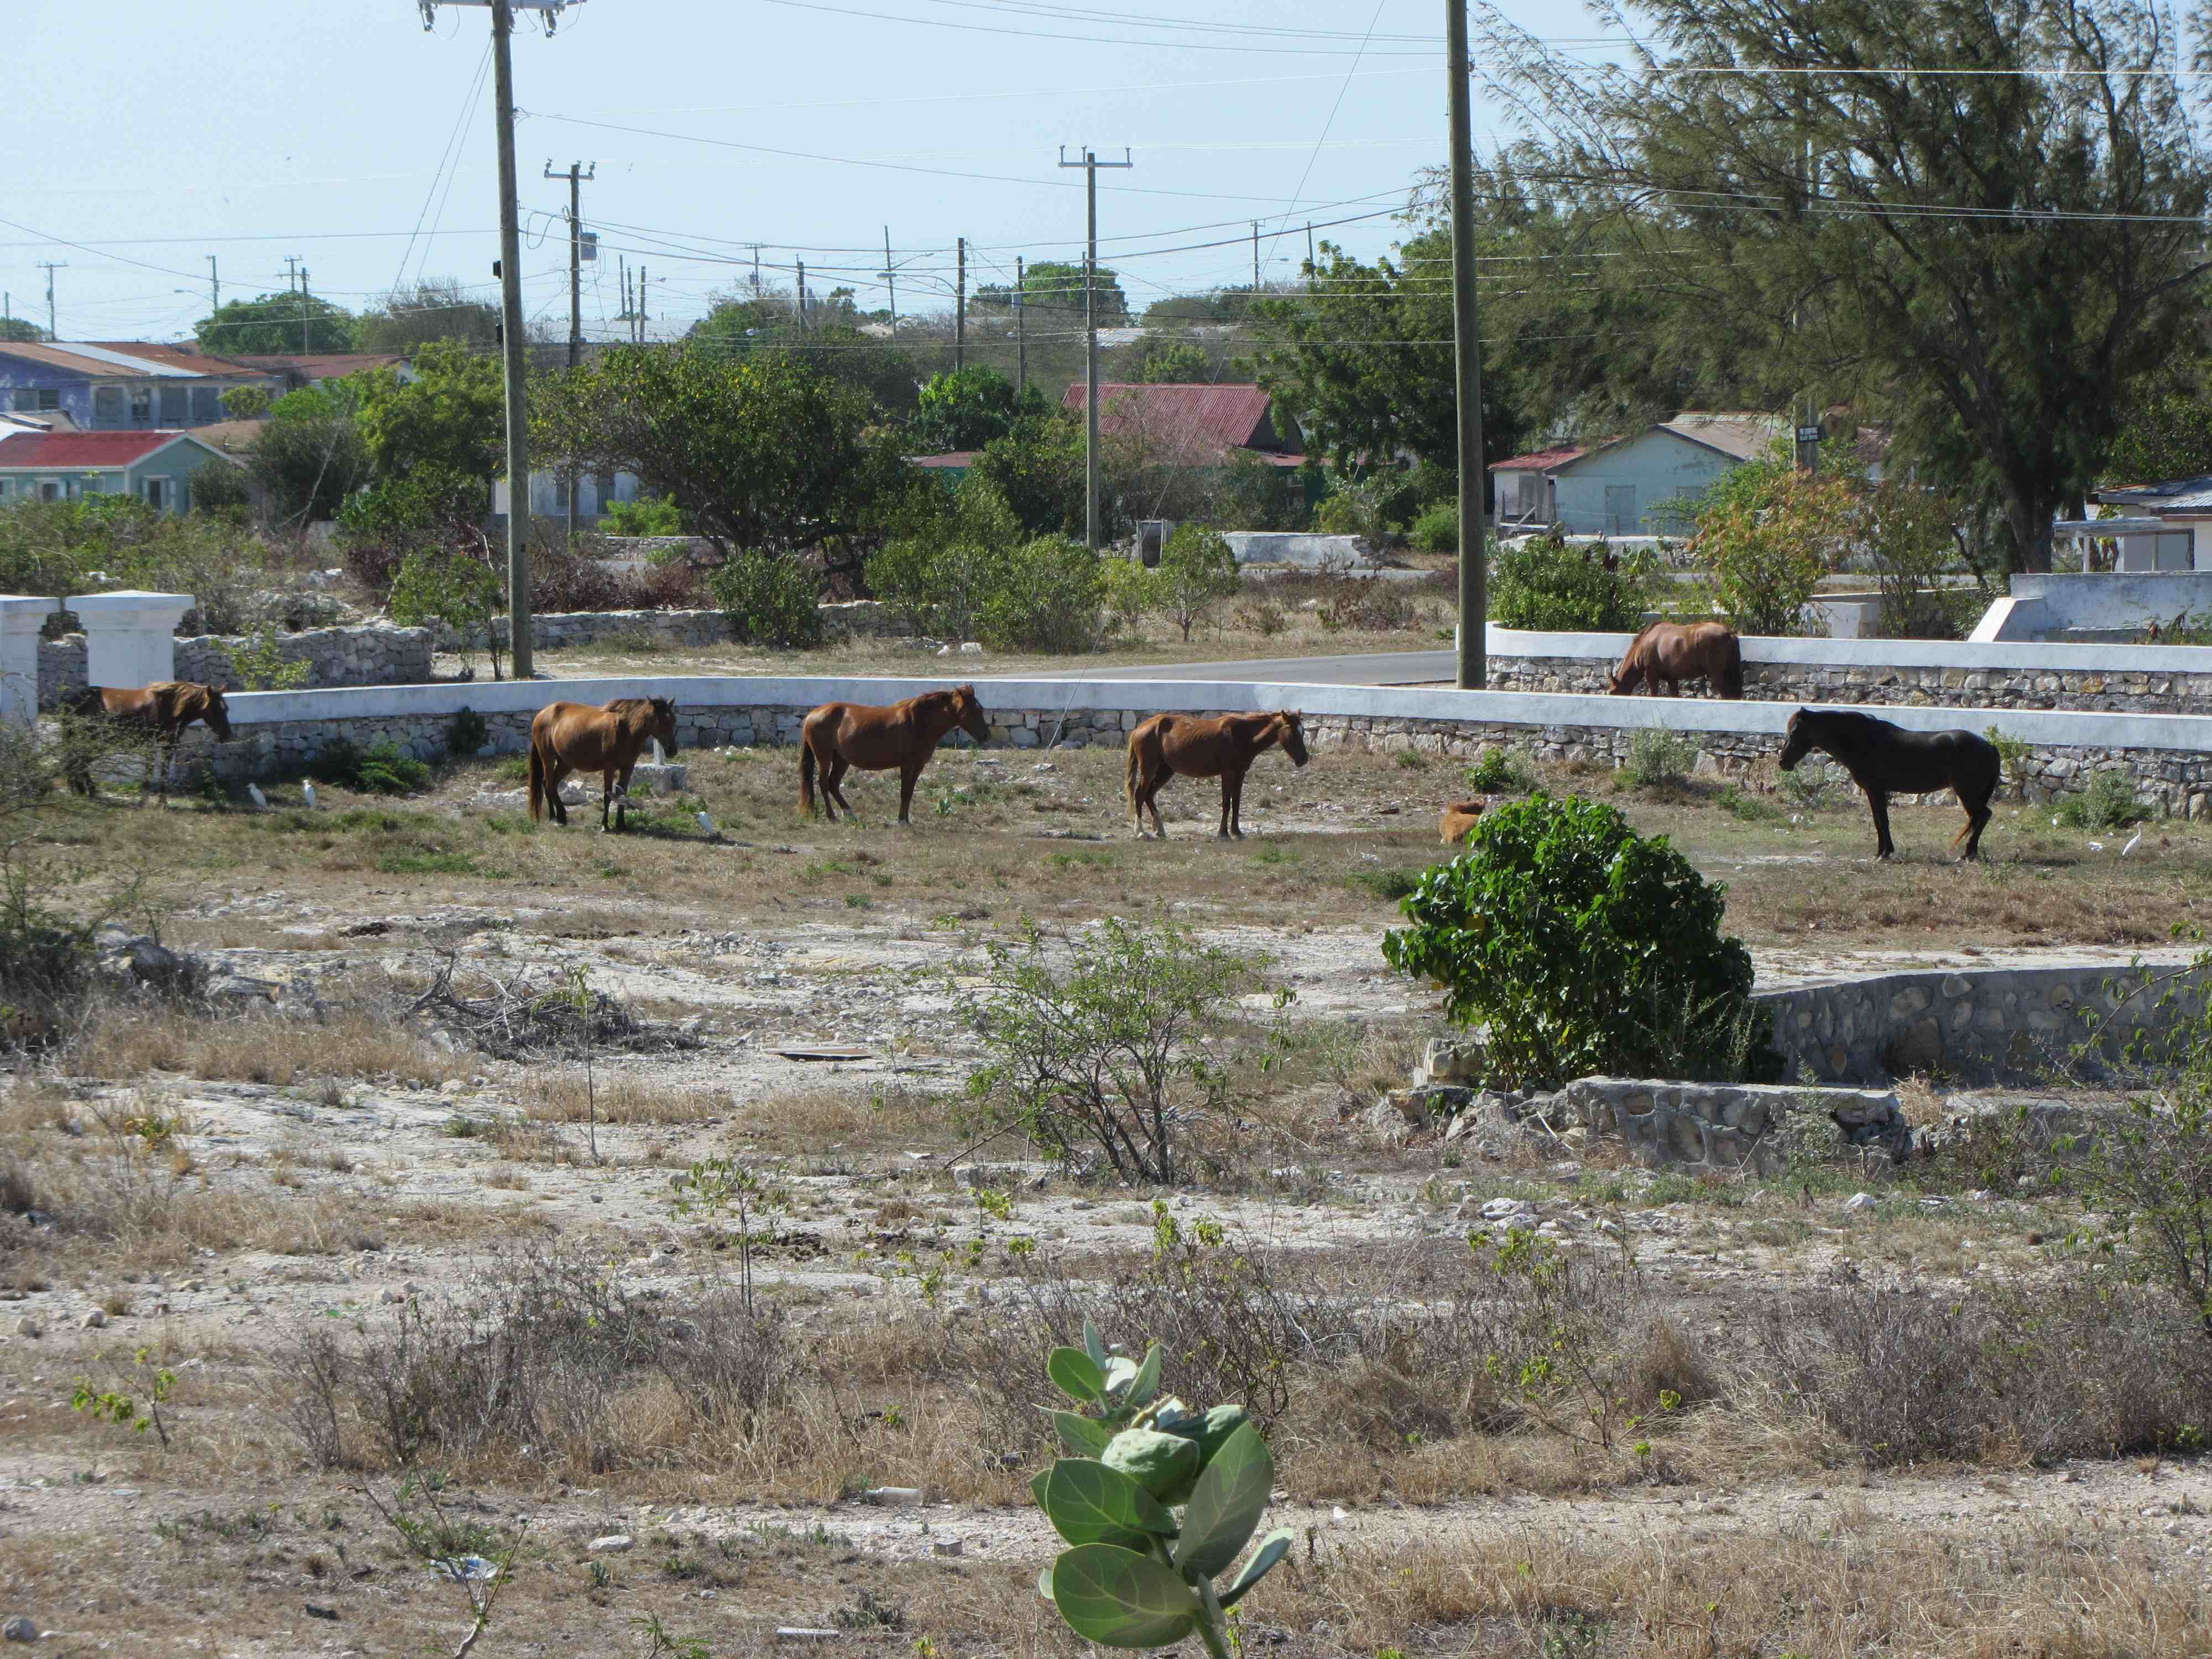 Horses in an open paddock on a very hot afternoon in South Caicos.